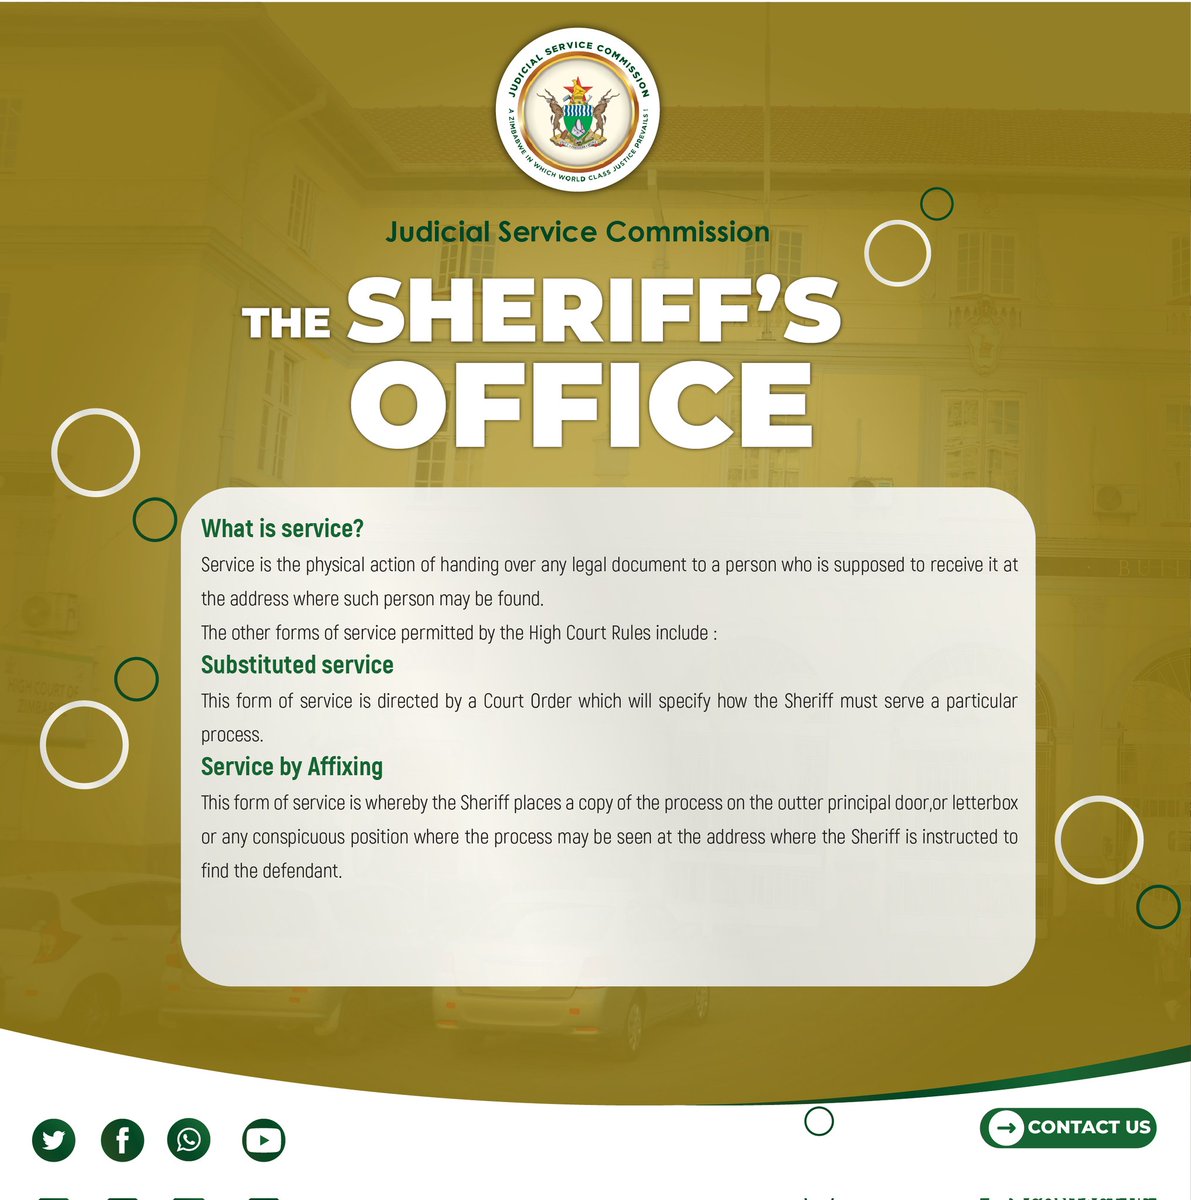 Know your departments. Today, we are looking at the Office of the Sheriff. Enjoy the read, and do not forget to like, share, and comment. @NPAZim @lawsocietyofzim @HeraldZimbabwe @DailyNewsZim @MoJLPA @StarfmZimbabwe @ZiFMStereo @abc_auctions